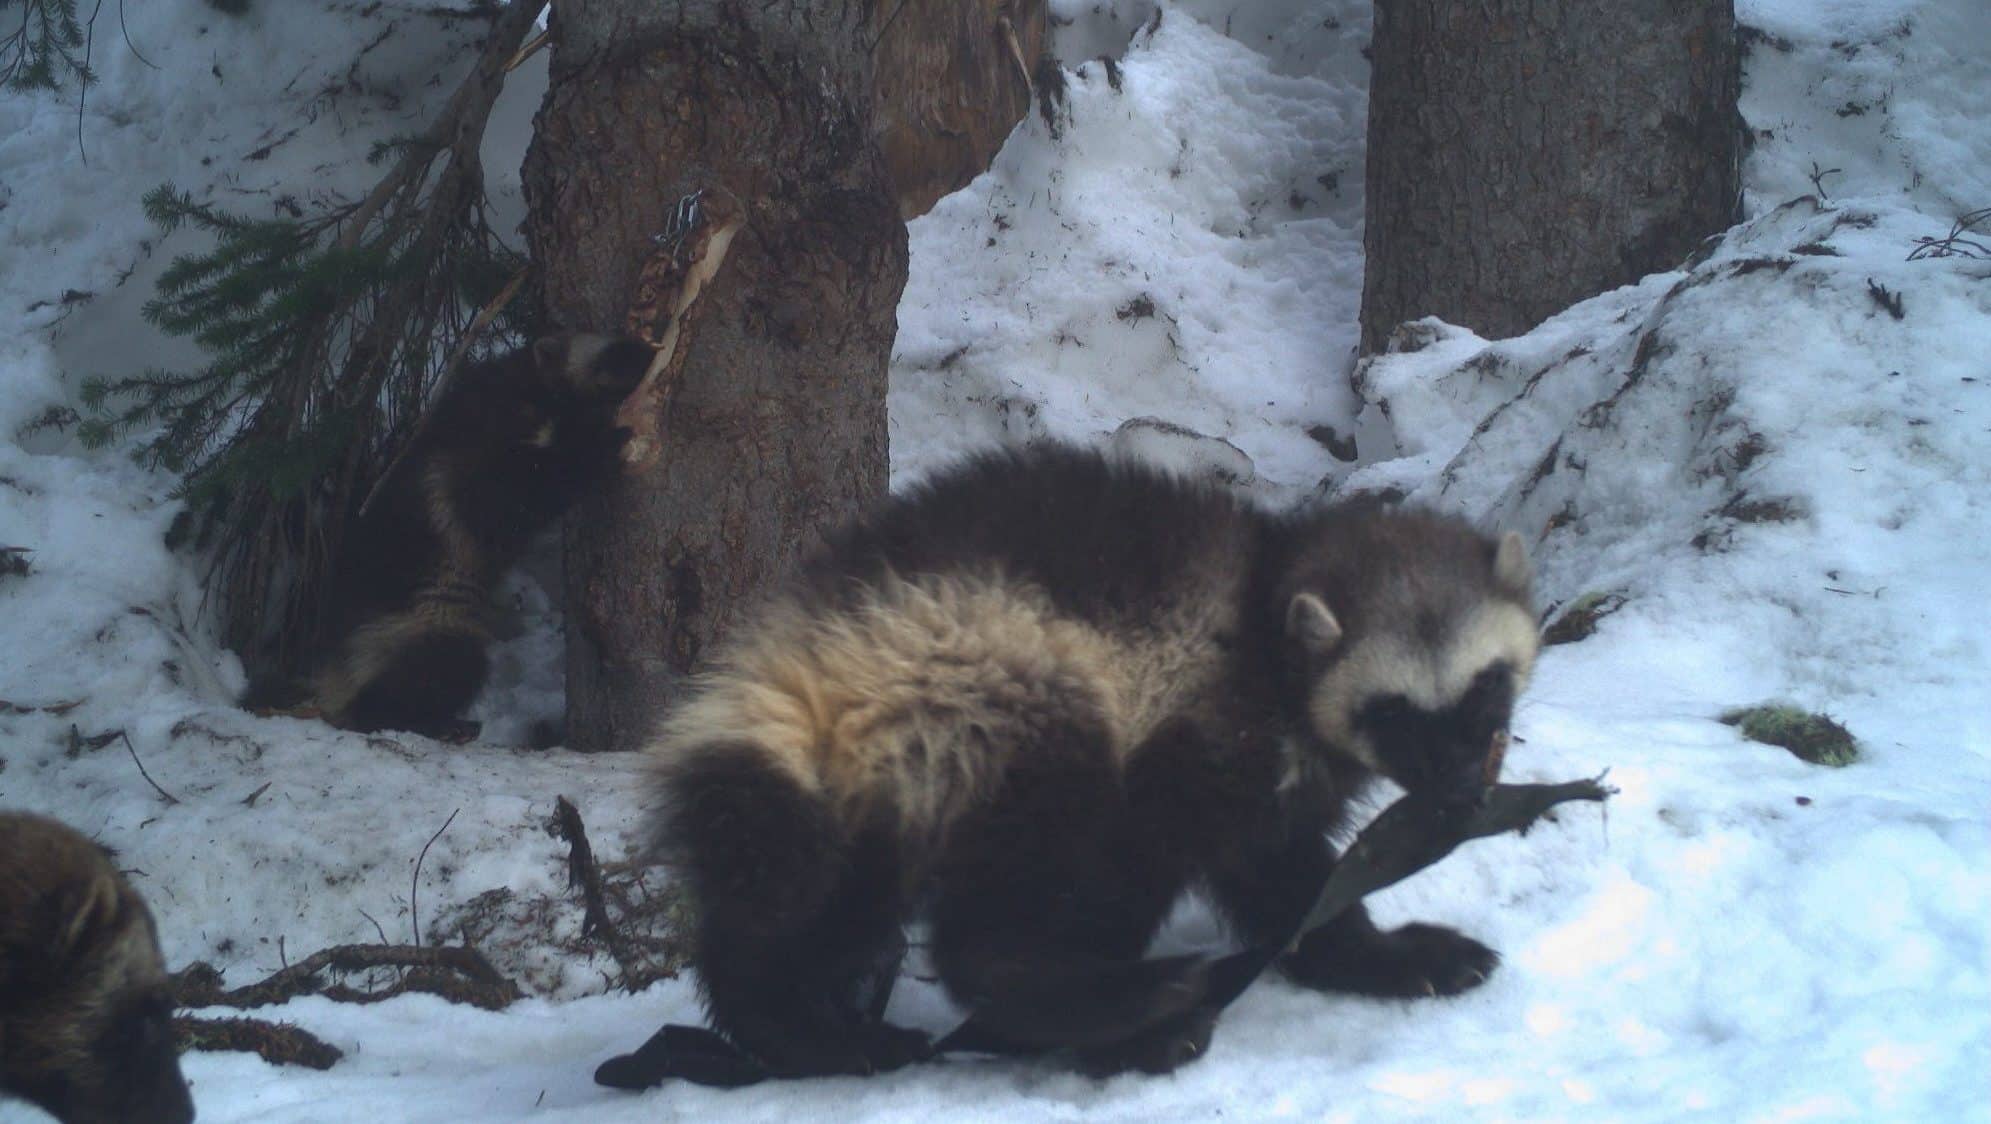 Second family of wolverines documented at Mount Rainier National Park